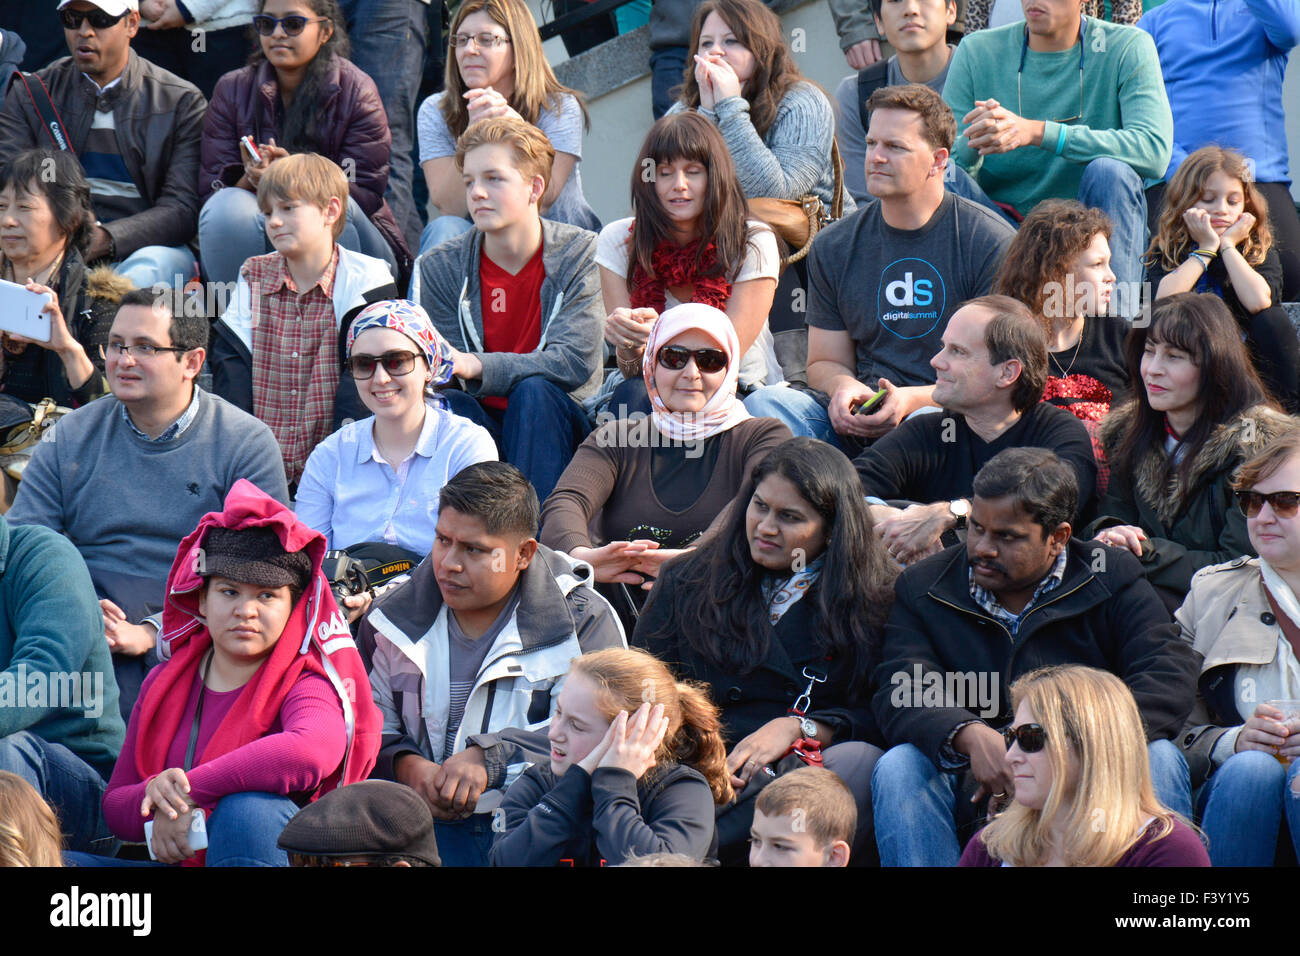 A large, diverse, all ages group of multi-ethnic people sitting outside on concrete bleachers reacting to watching street artists perform in the USA Stock Photo